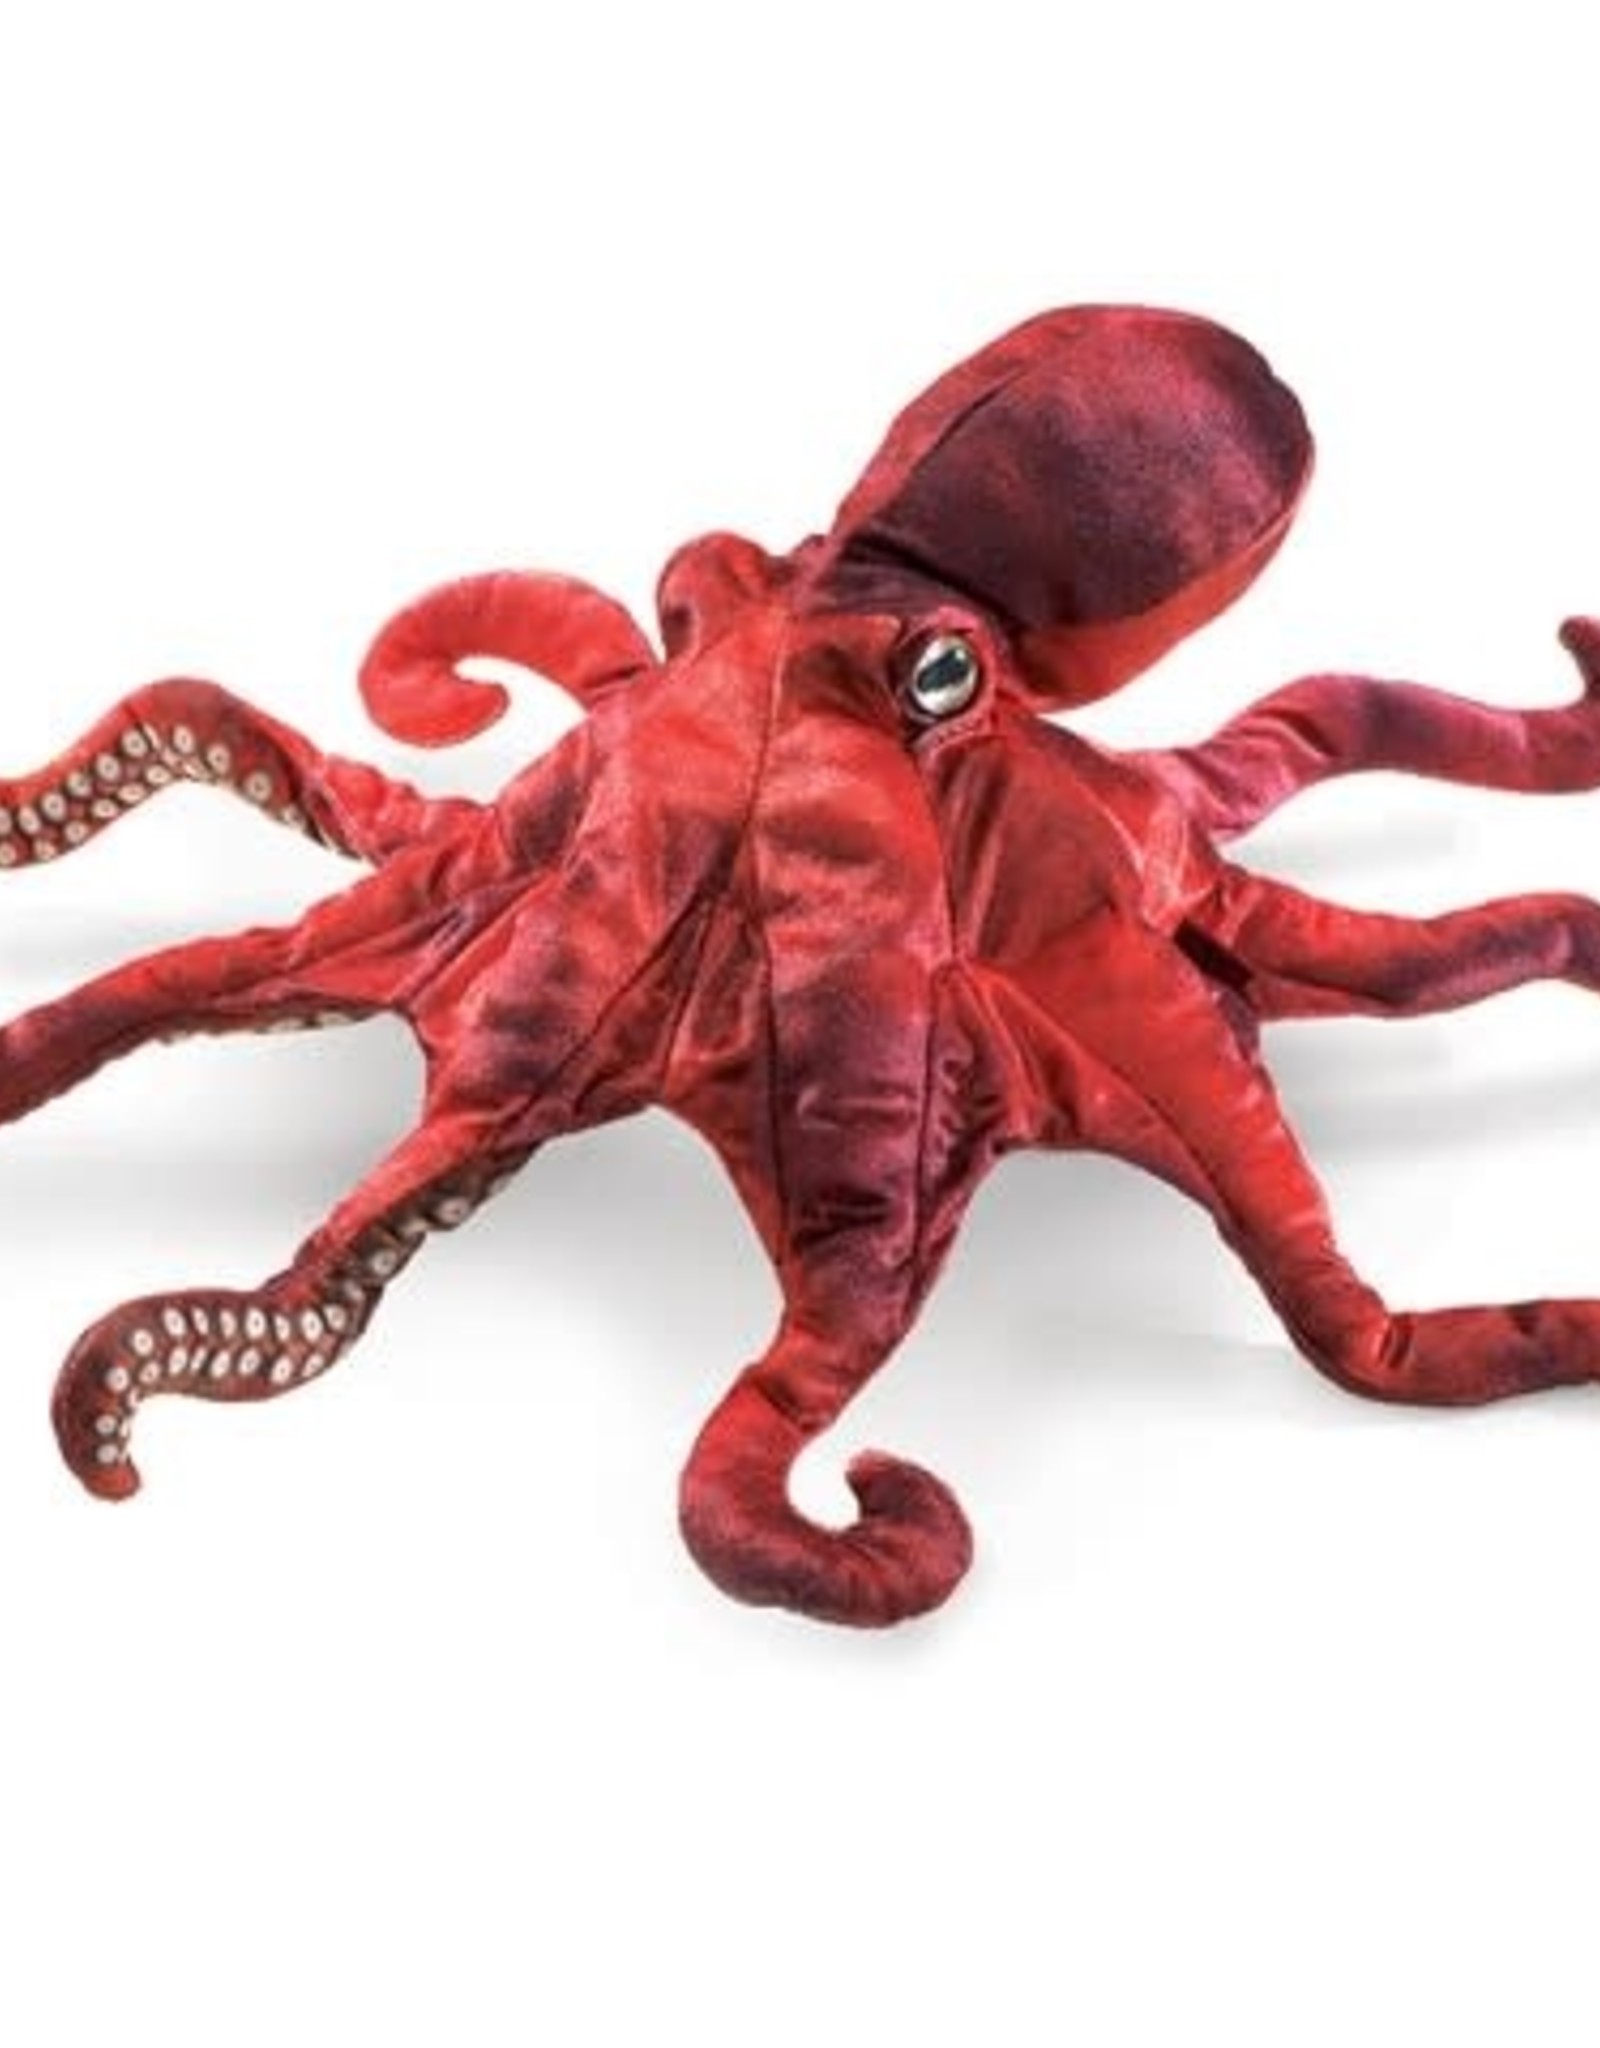 Folkmanis Puppet: Red Octopus